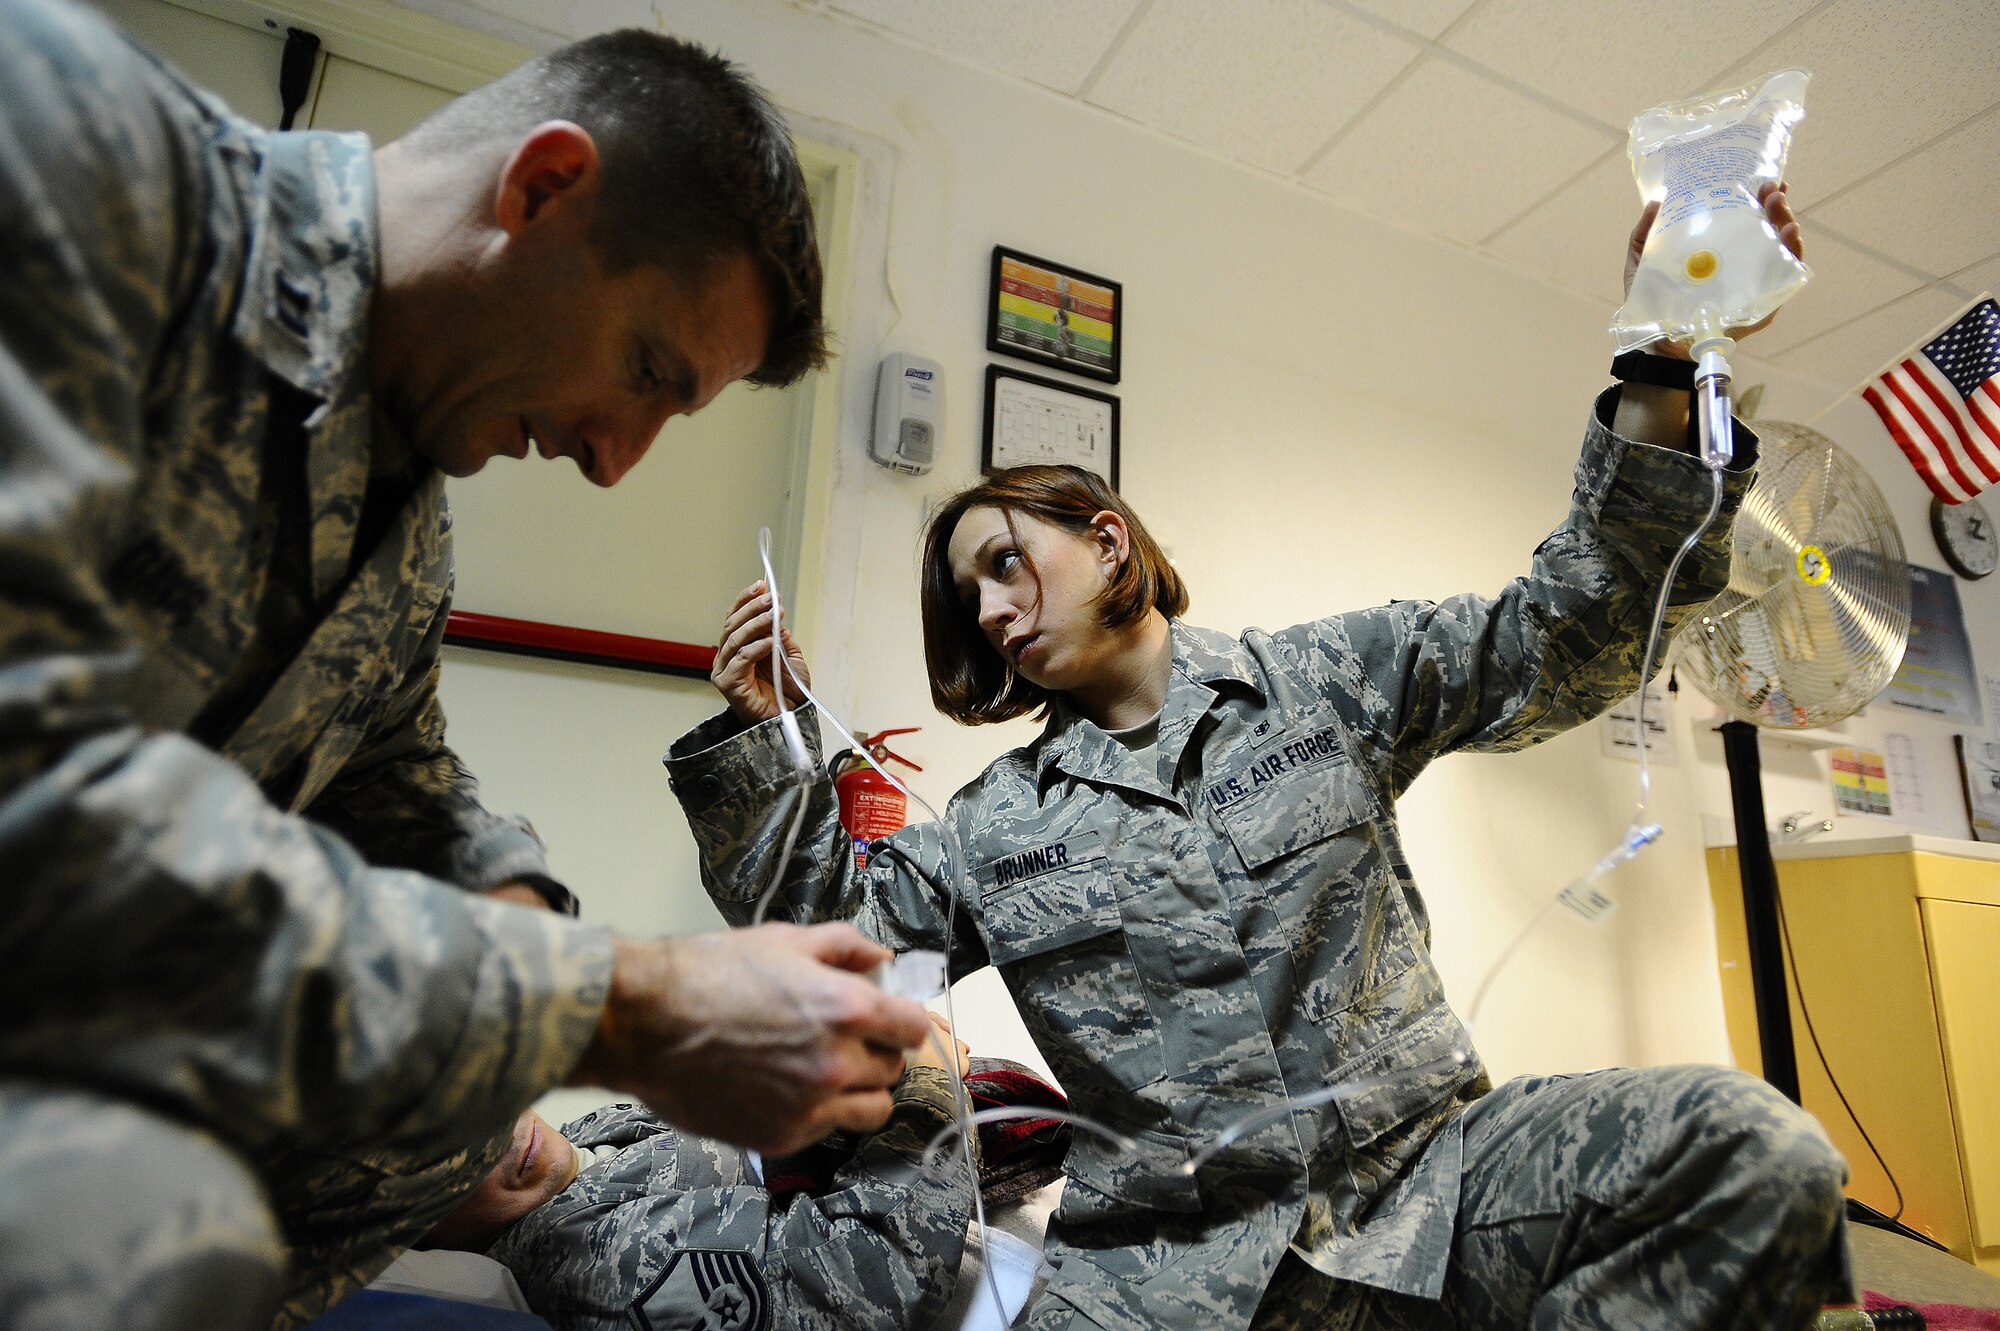 Capt. John Davis troubleshoots an intravenous pump as Senior Airman Samantha Brunner inspects the IV pump's port for any kind of blockage at the Contingency Aeromedical Staging Facility on Joint Base Balad, Iraq, Nov. 27, 2008. Both Airmen are preparing patients for an aeromedical evacuation flight. Airman Brunner, an aerospace medical service journeyman with the 332nd Expeditionary Aerospace Medical Squadron, is a reservist deployed from the 911th Airlift Wing at Pittsburgh International Airport Air Reserve Station, Pa. Captain Davis, a clinical nurse with the 332nd Expeditionary Aerospace Medical Squadron, is deployed from Patrick Air Force Base, Fla. (U.S. Air Force photo/Airman 1st Class Jason Epley)